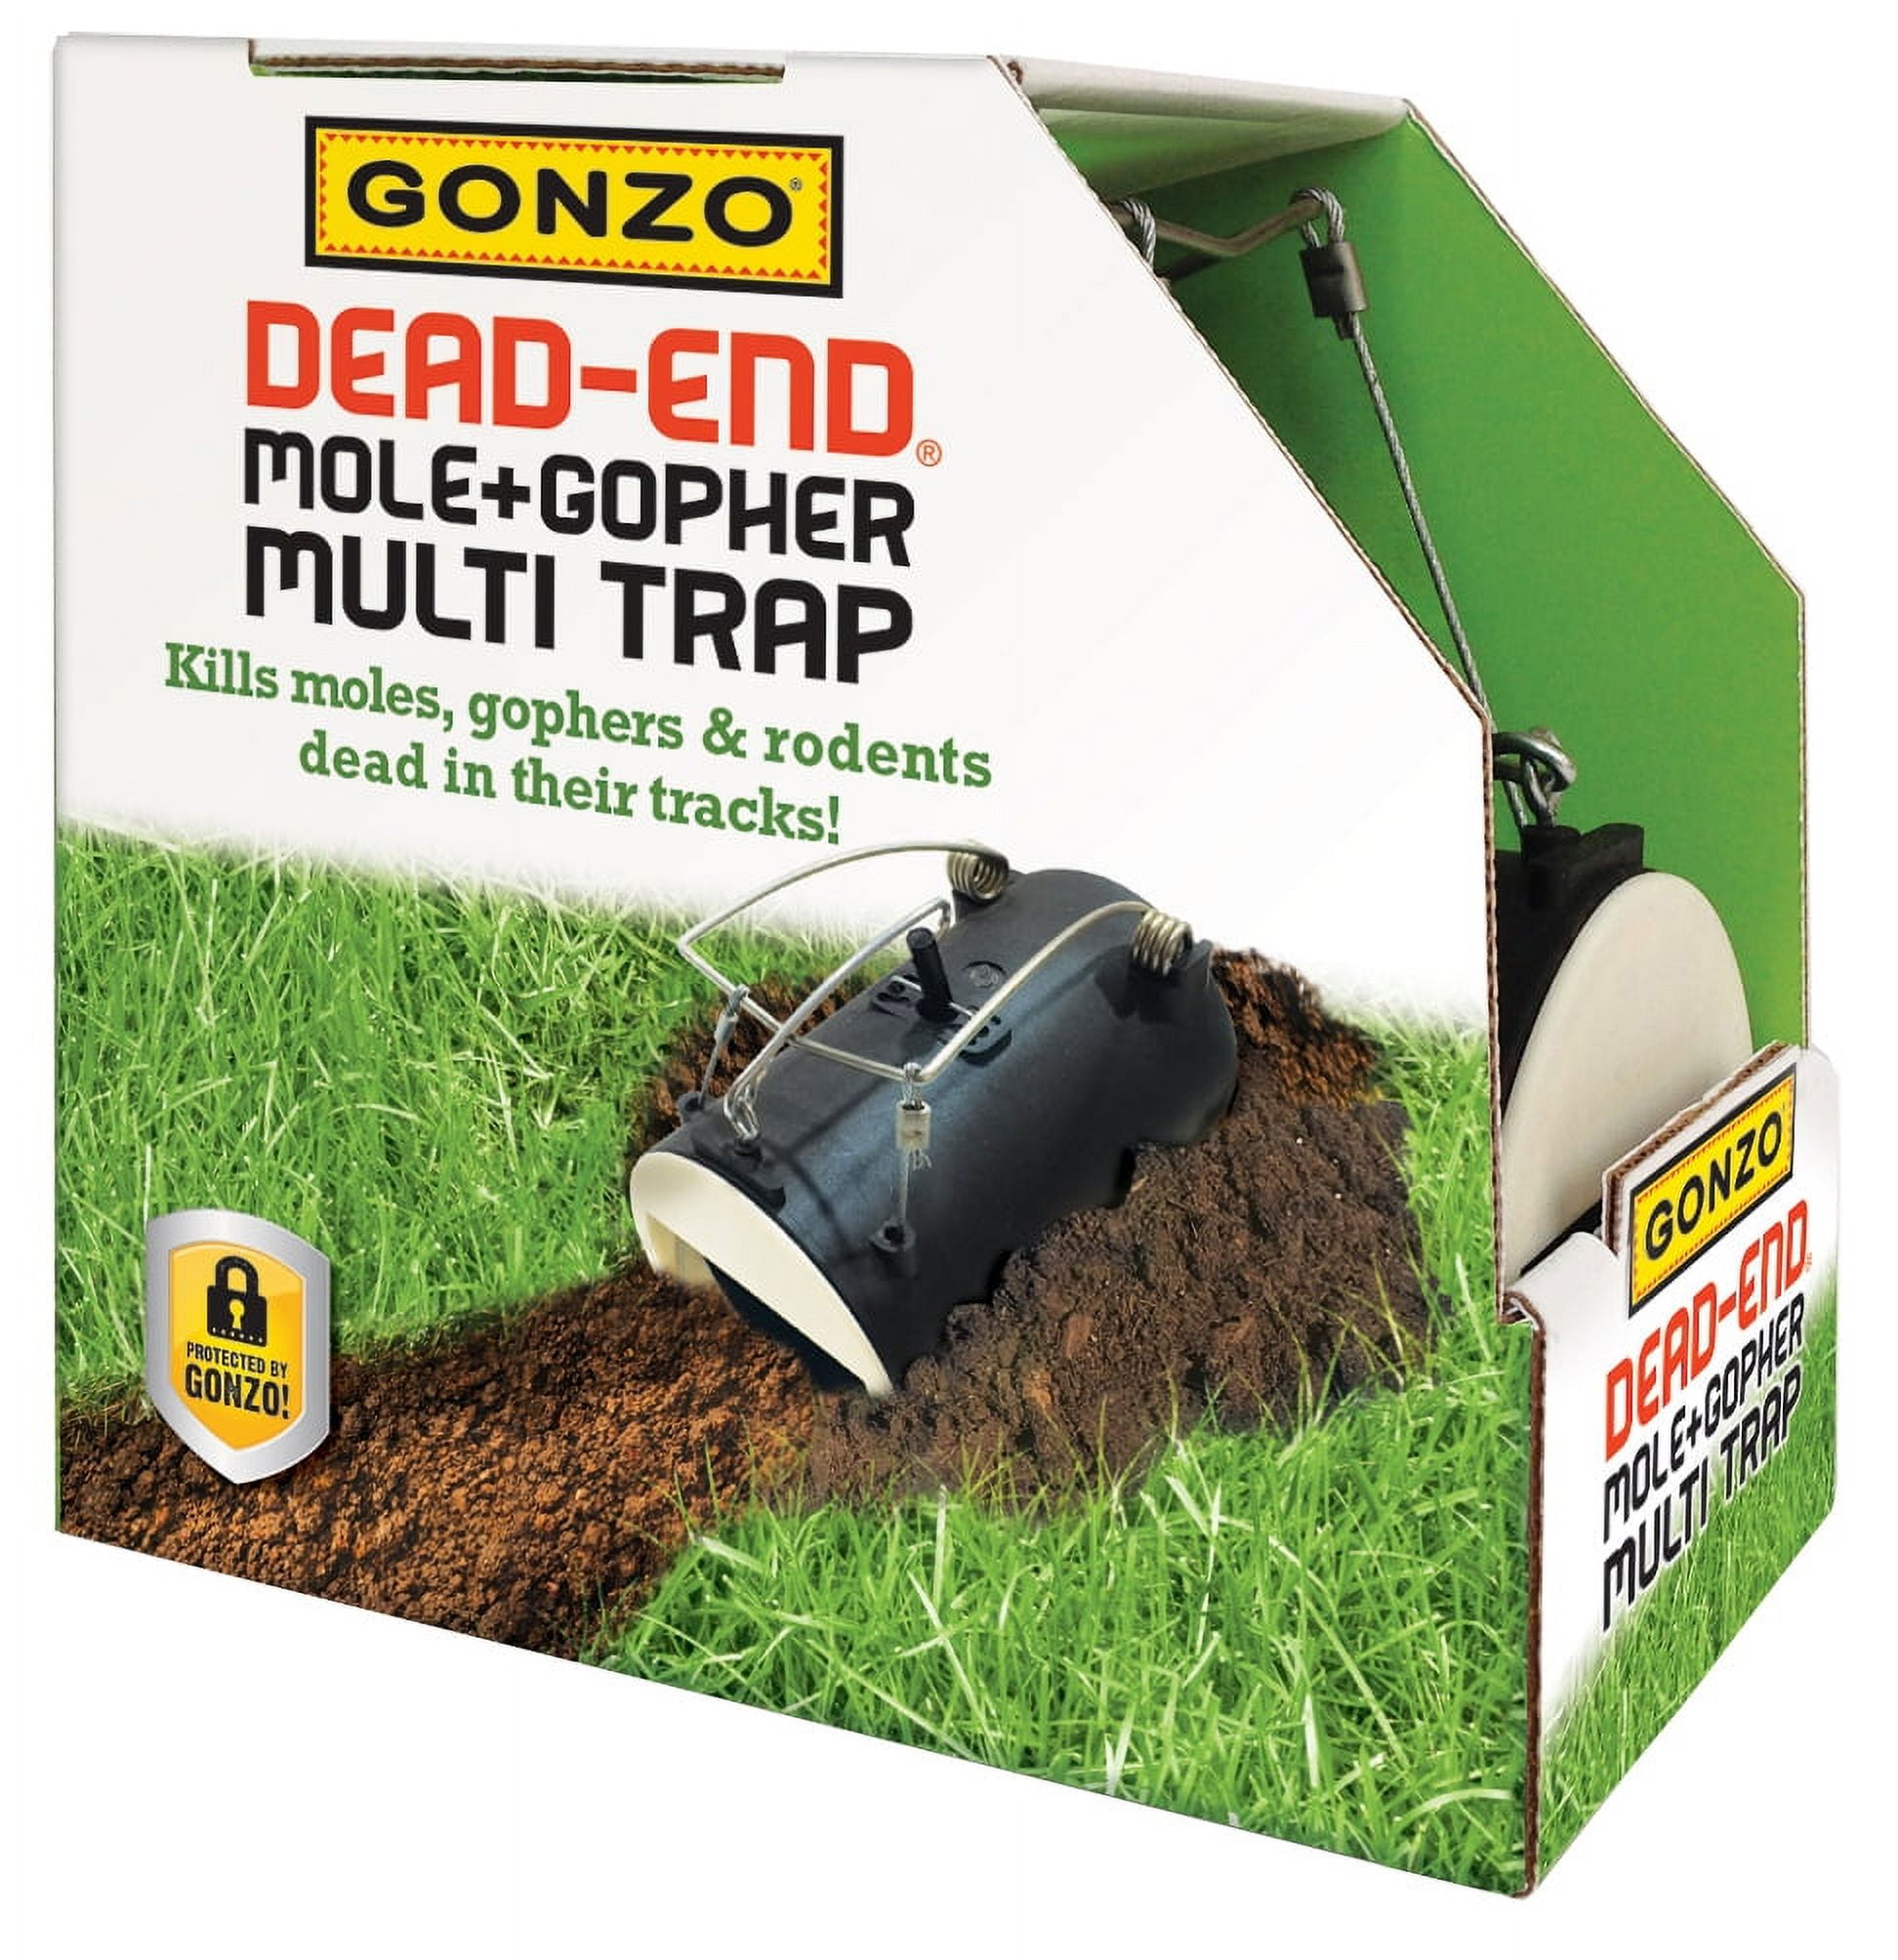  Tomcat Mole Trap, Innovative and Effective Mole Remover Trap  Kills Without Drawing Blood, Reusable and Hands-Free, 1 Trap : Patio, Lawn  & Garden